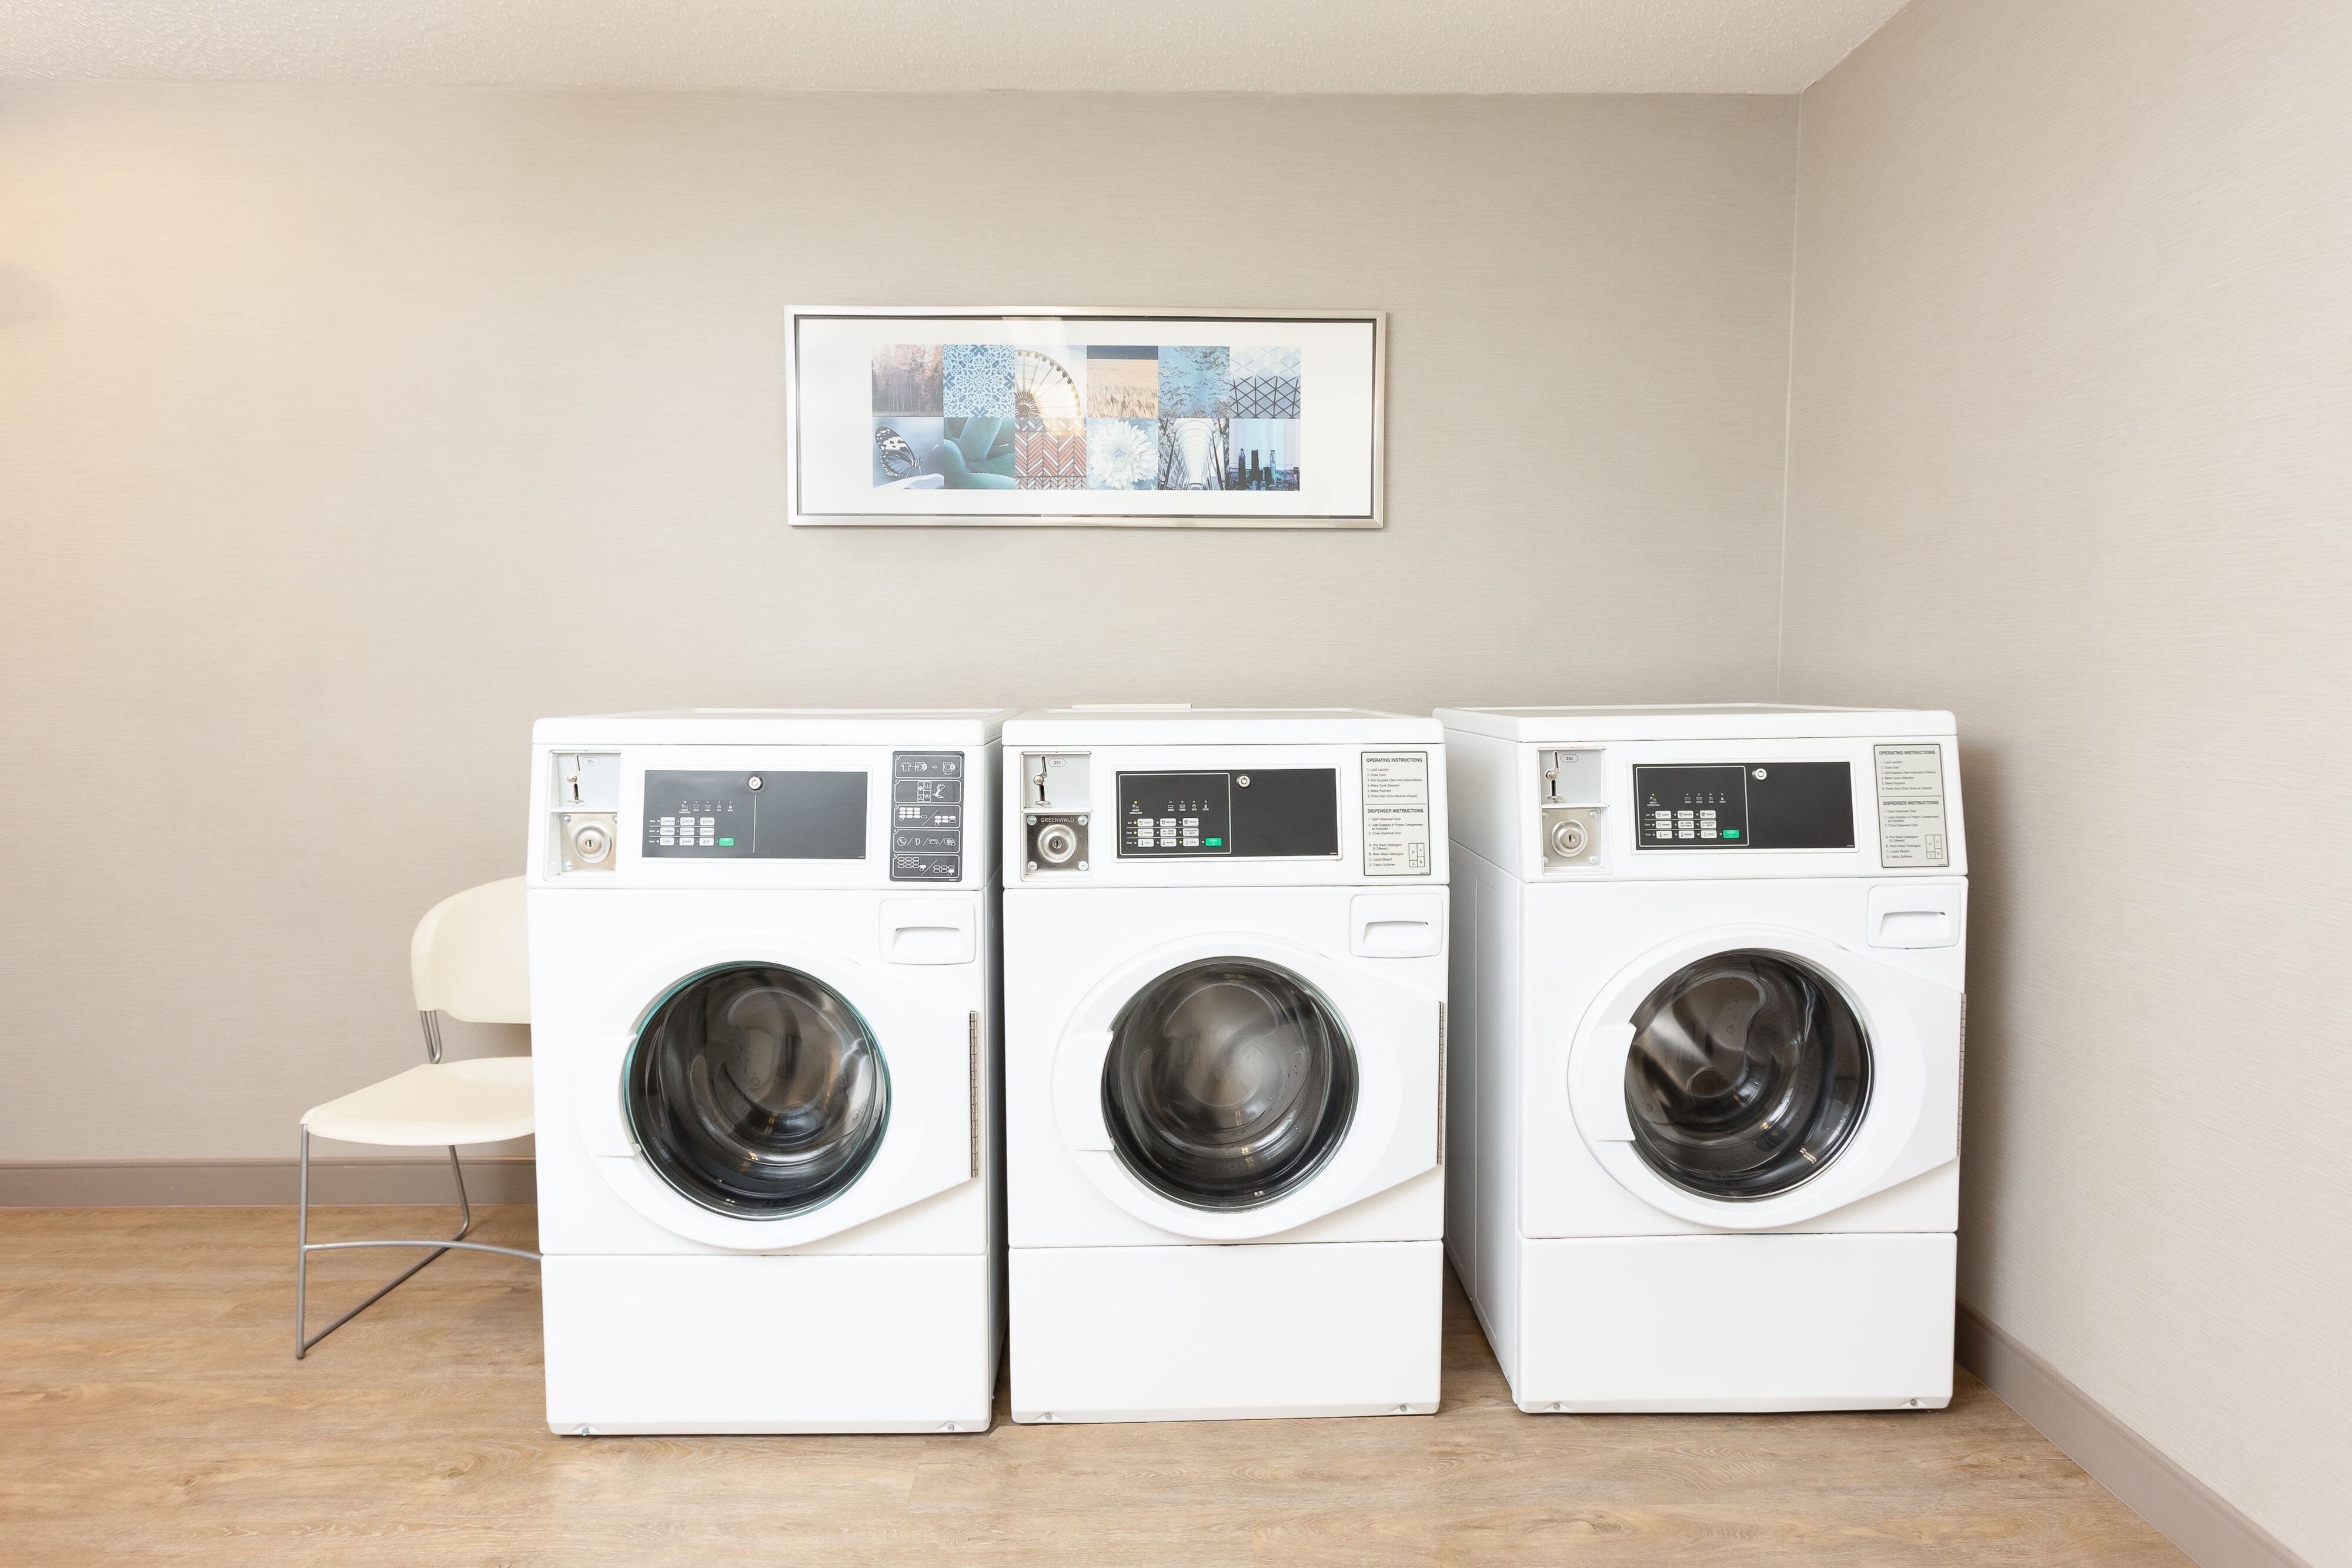 coin operated washing machines in laundry room